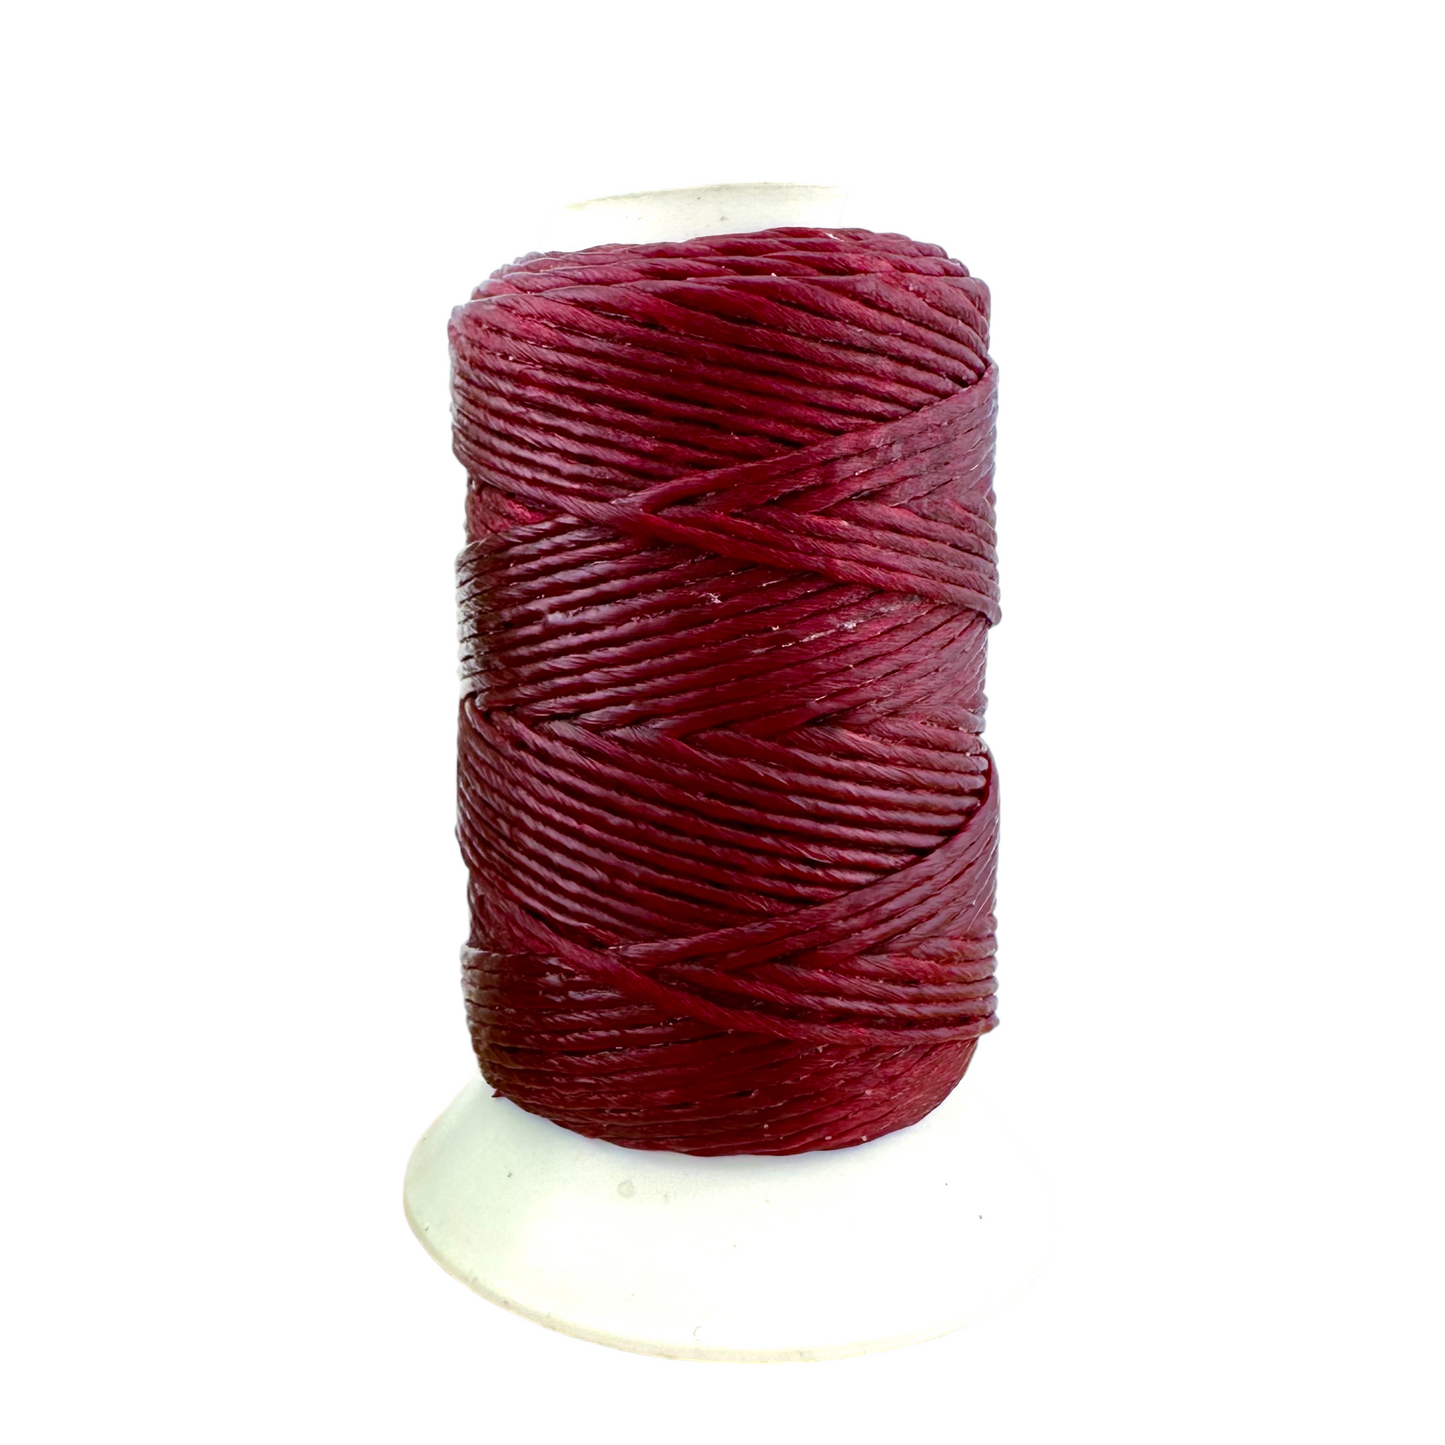 Waxed Macrame Cord 1mm - Small Spool 30 meters - Red